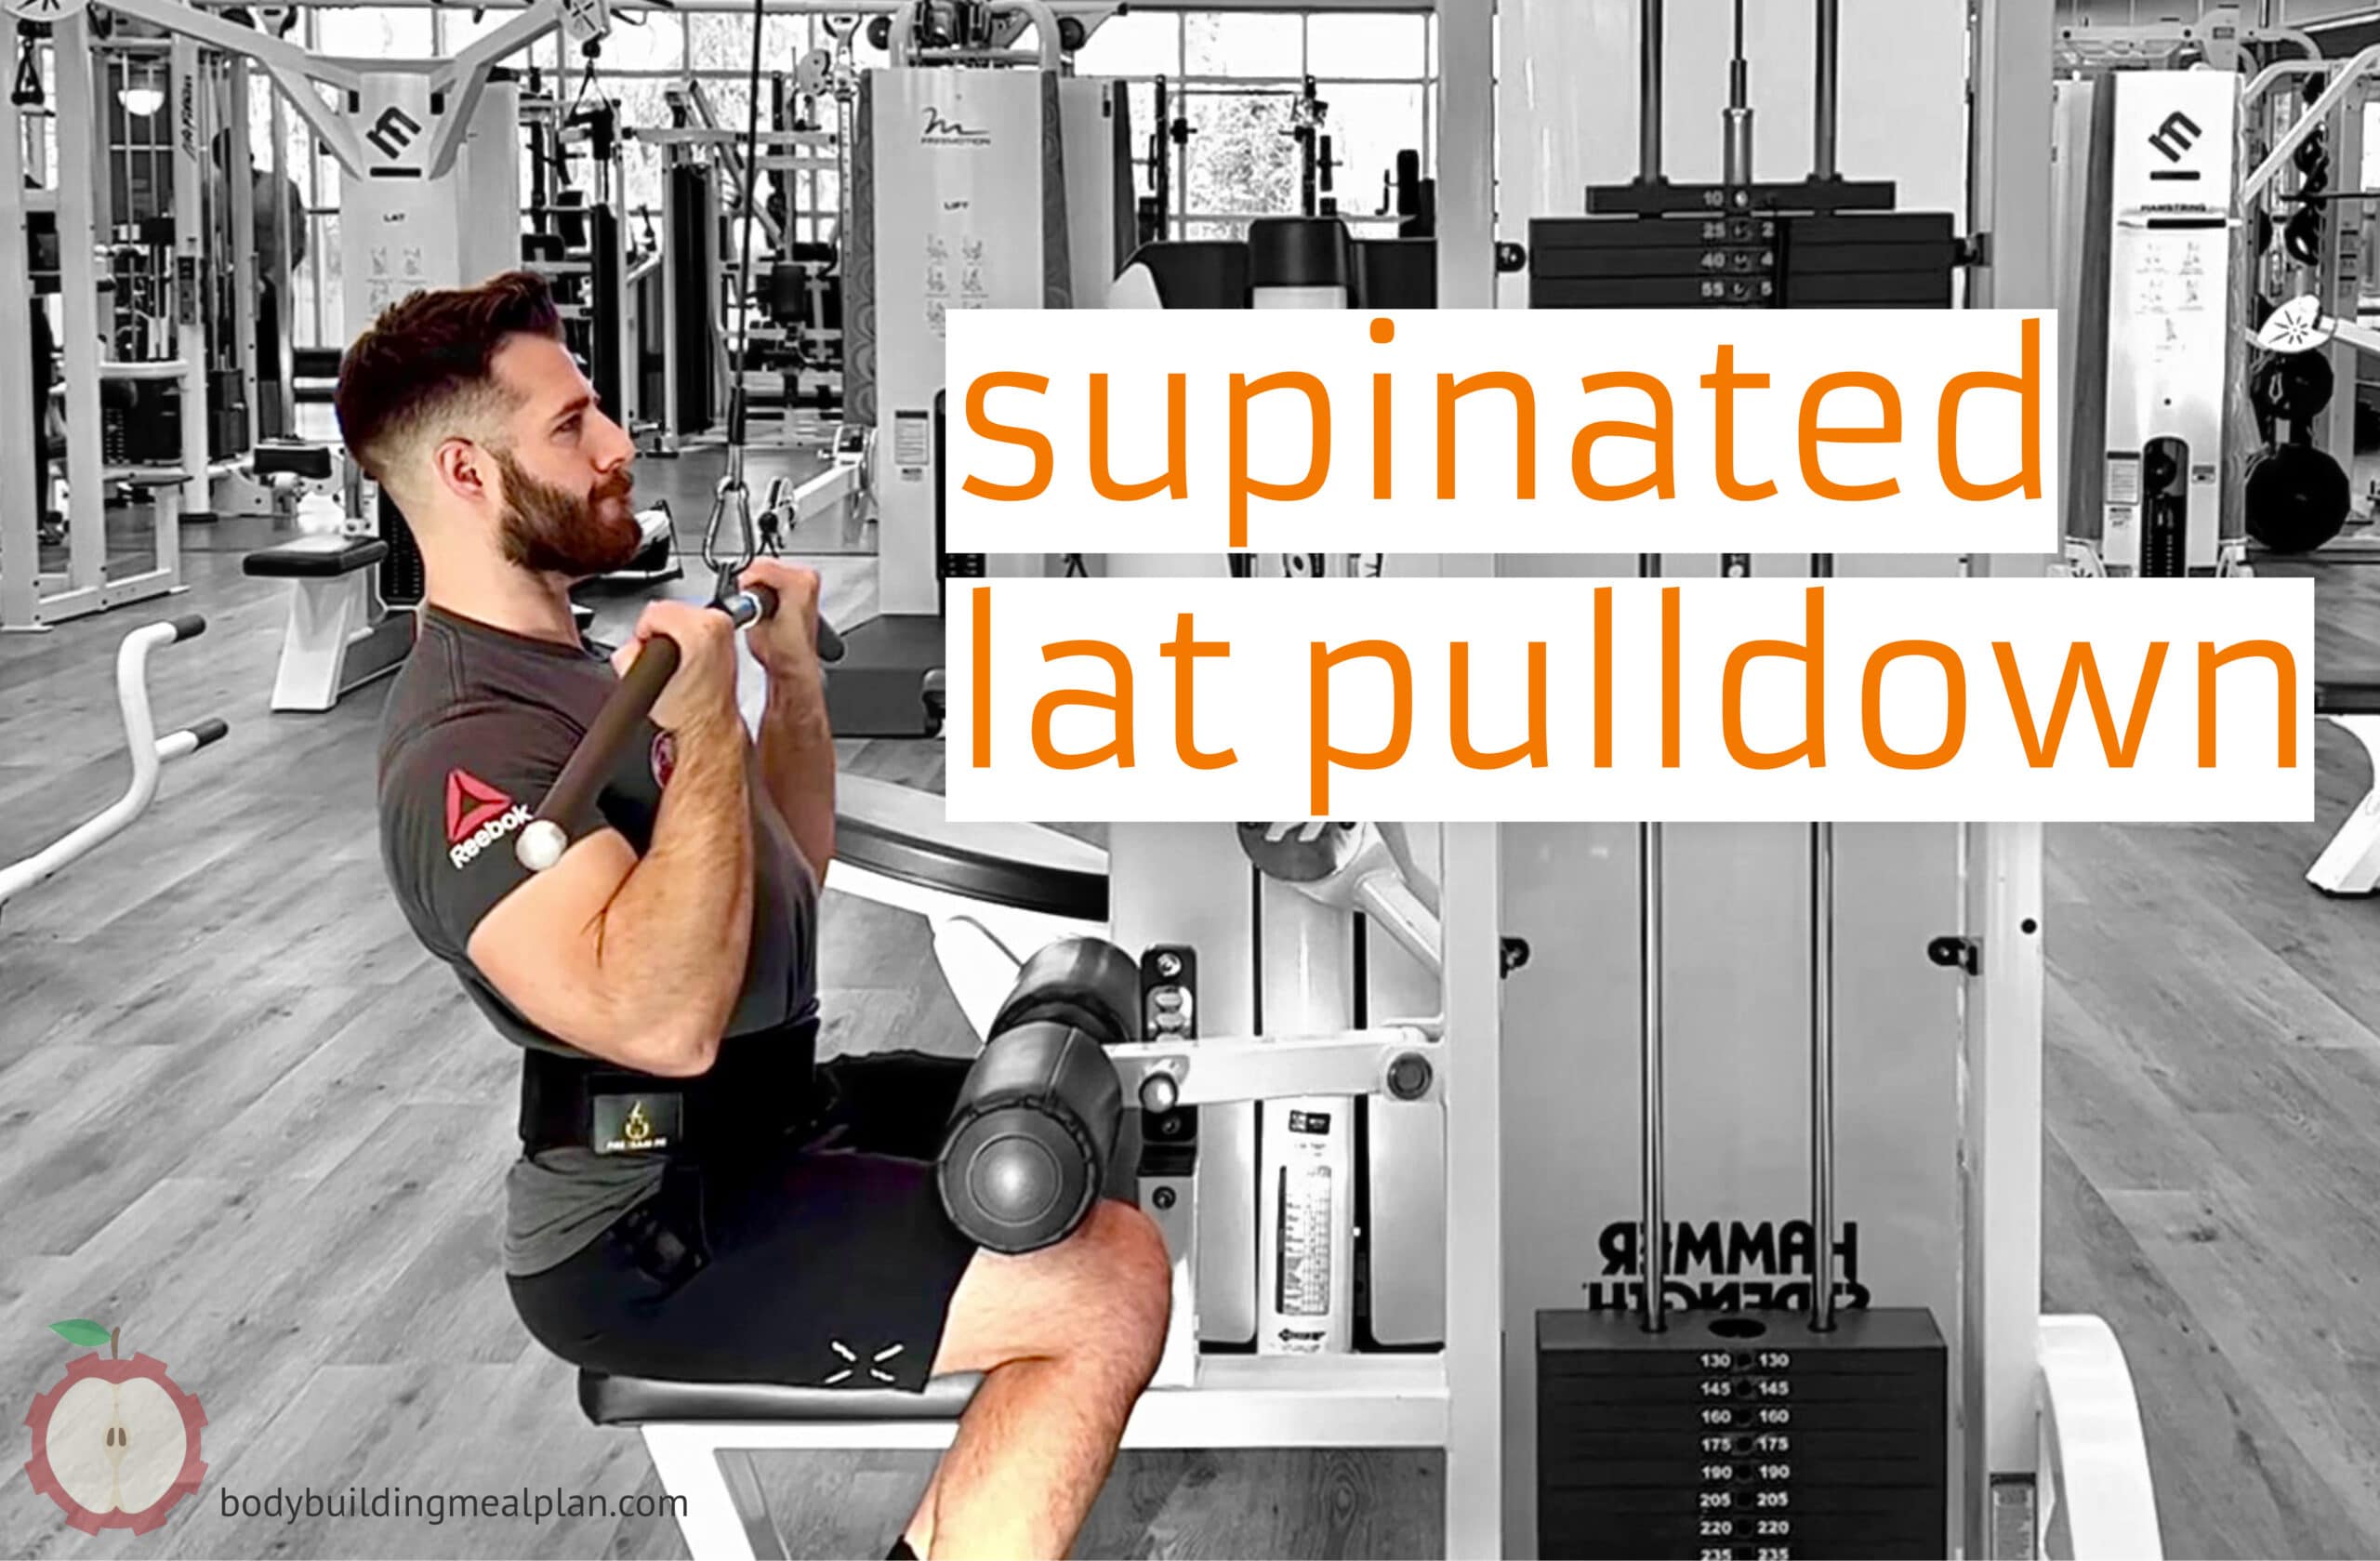 Supinated Lat Pulldown (Reverse Grip) Benefits & Proper Form